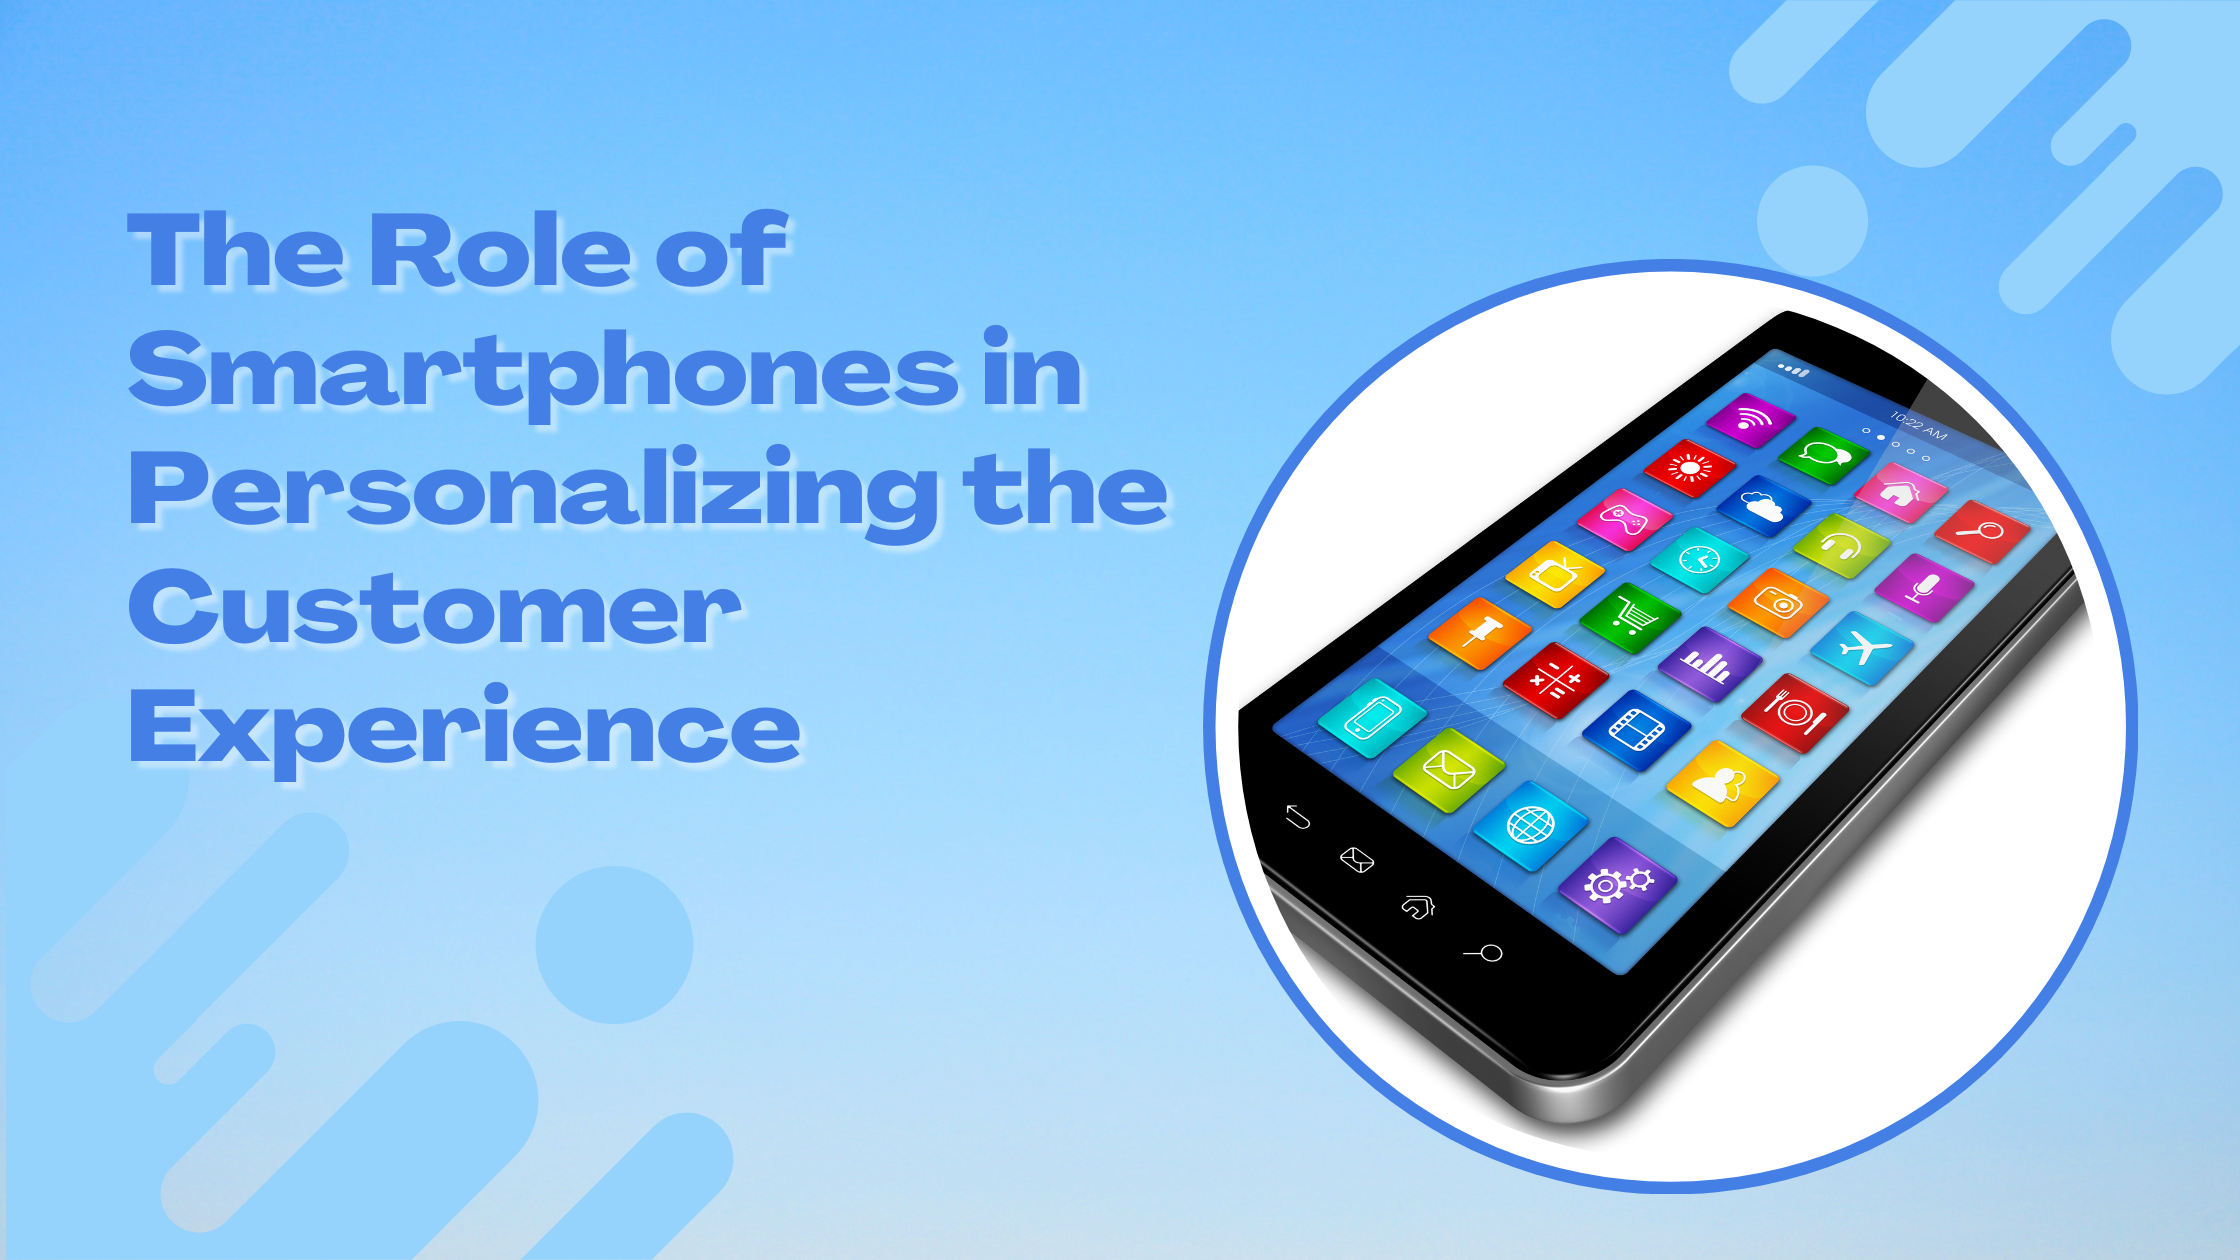 The Role of Smartphones in Personalizing the Customer Experience